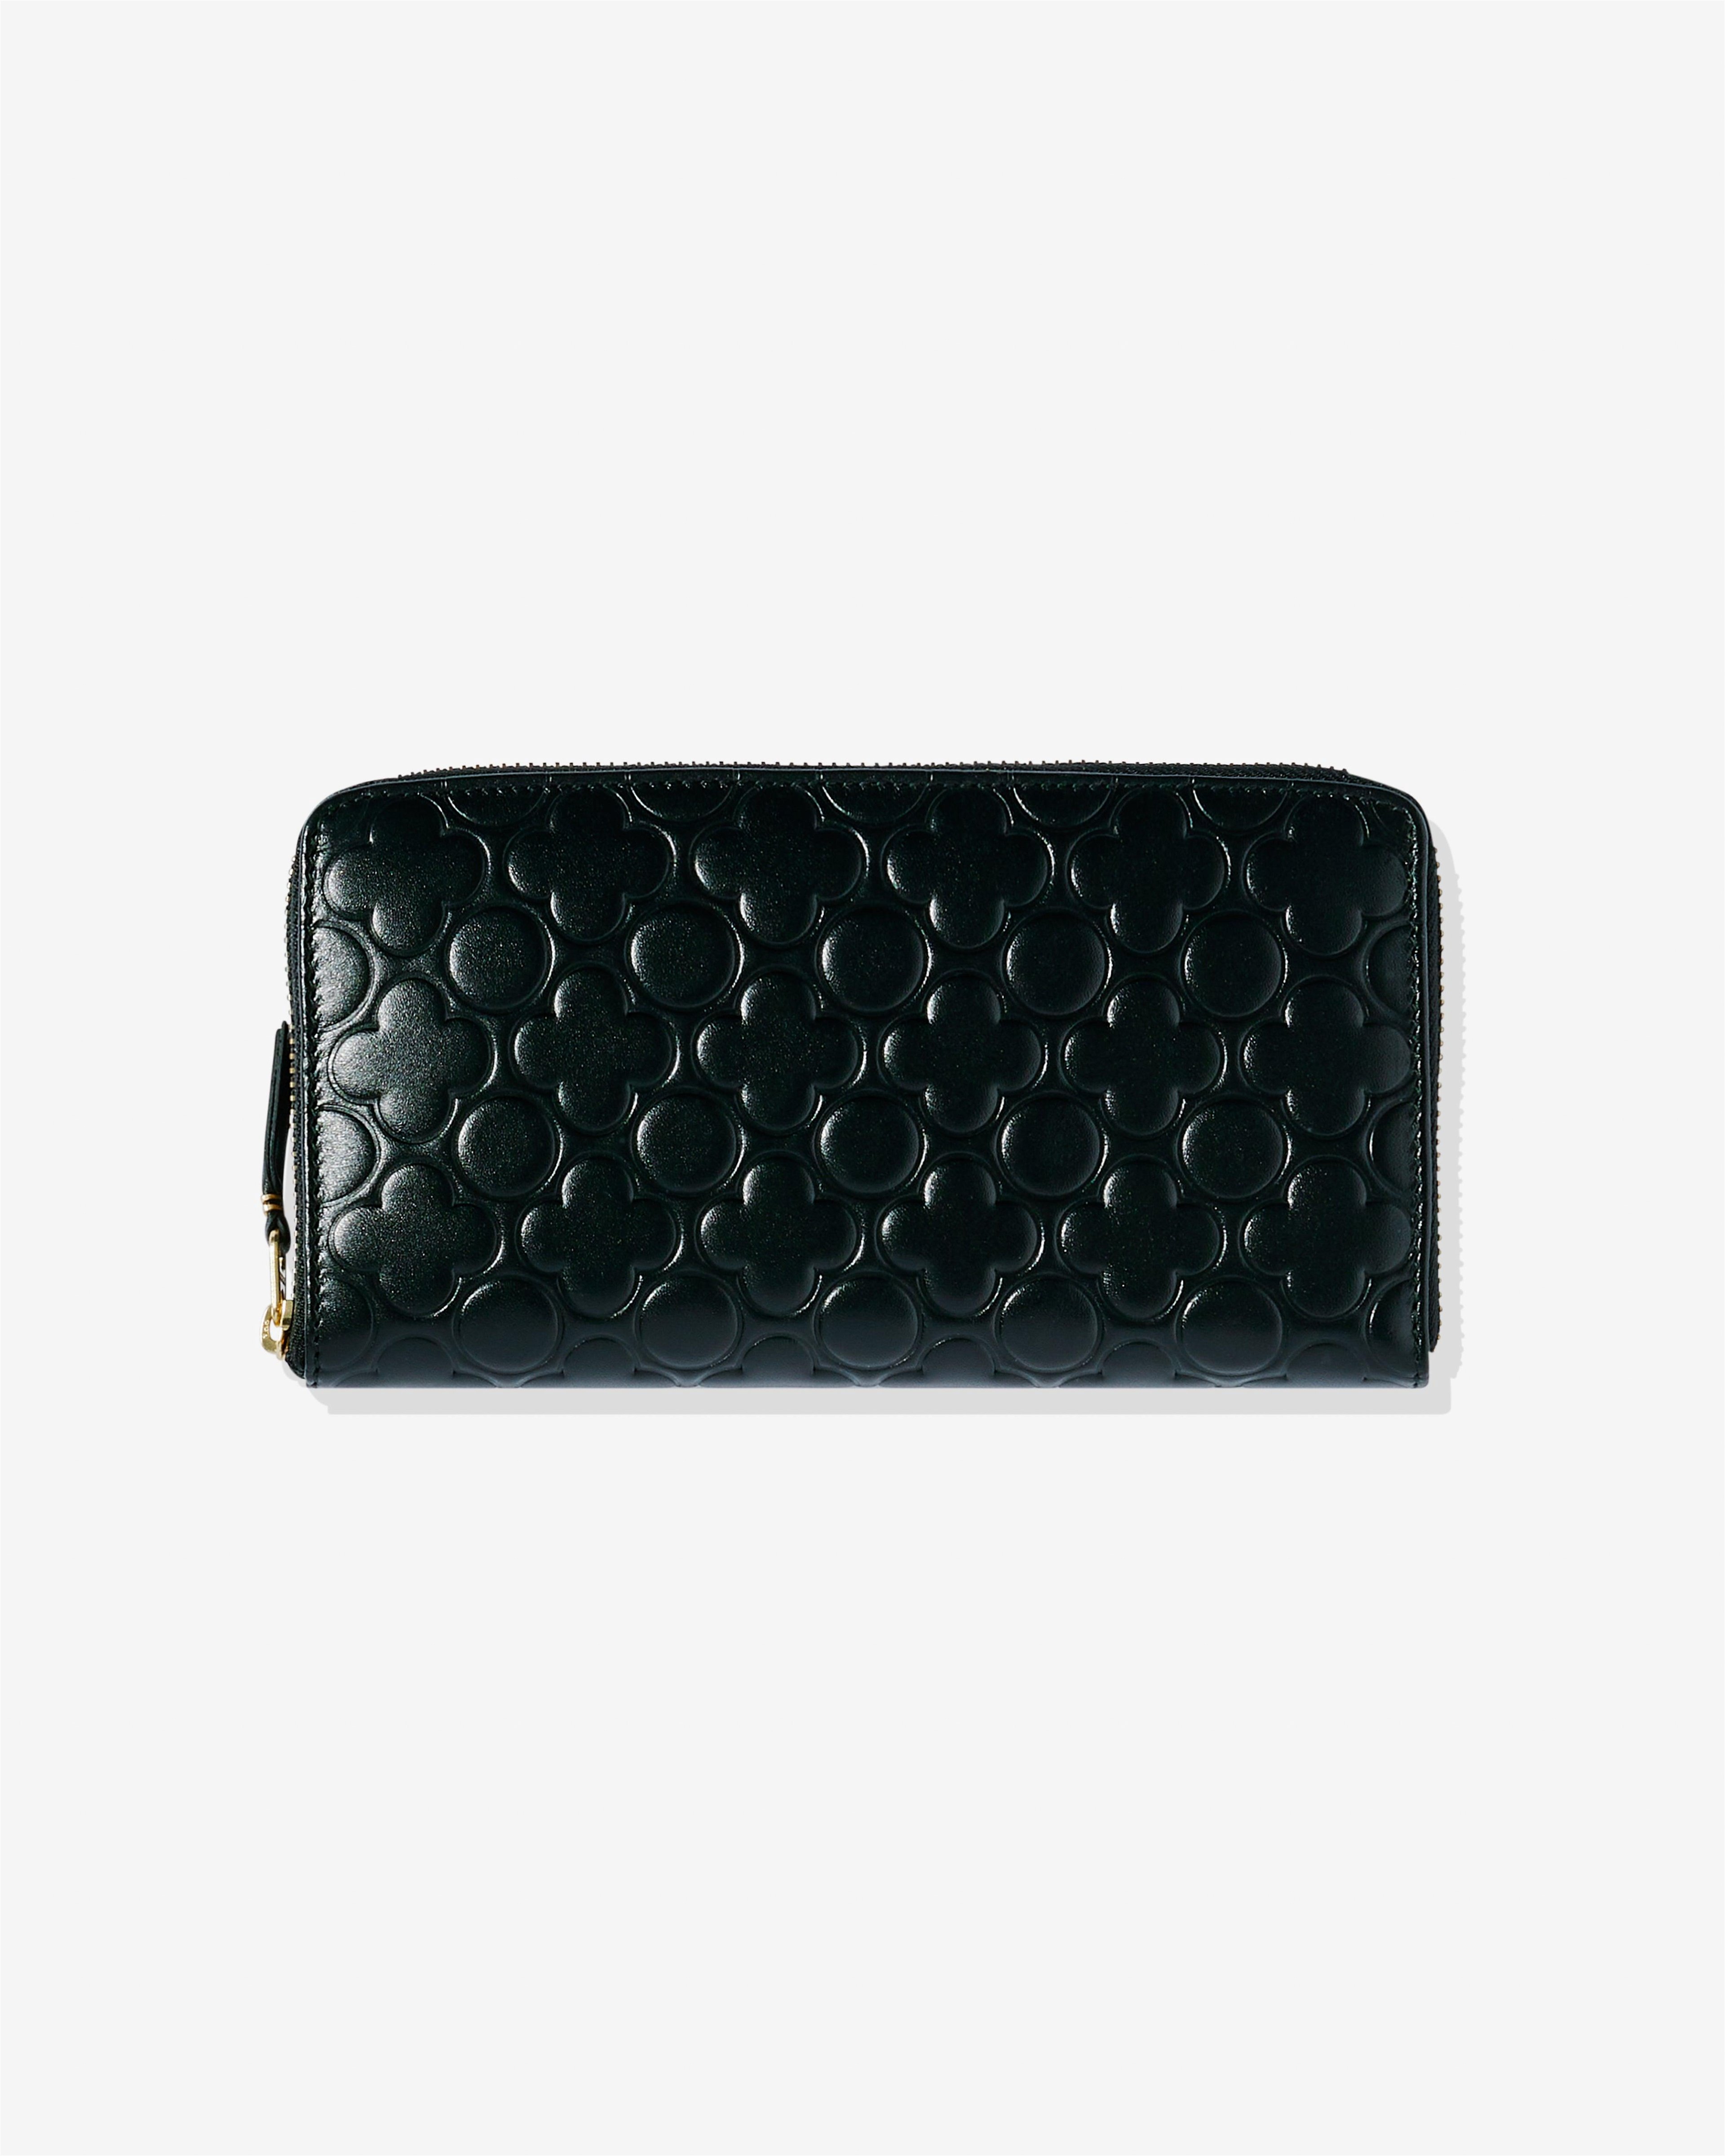 CDG Wallet - Classic Embossed B Zip Around Wallet - (Black SA011EB) by COMME DES GARCONS